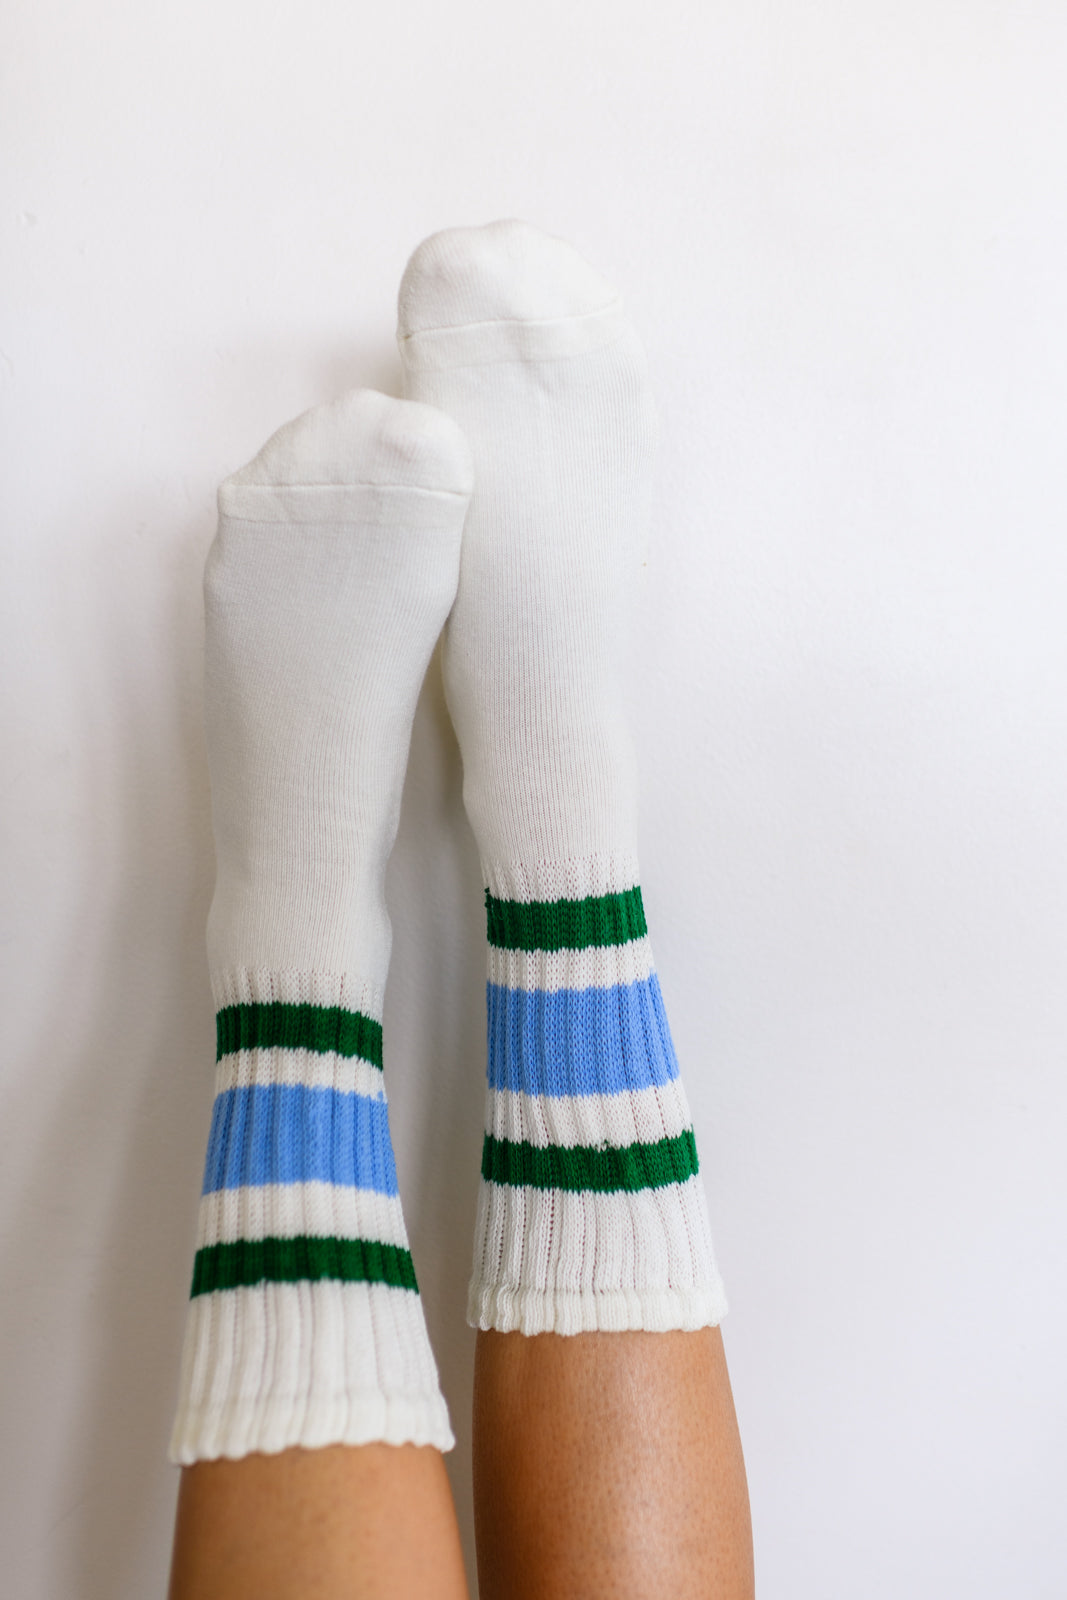 Scalloped Socks in Green and Blue